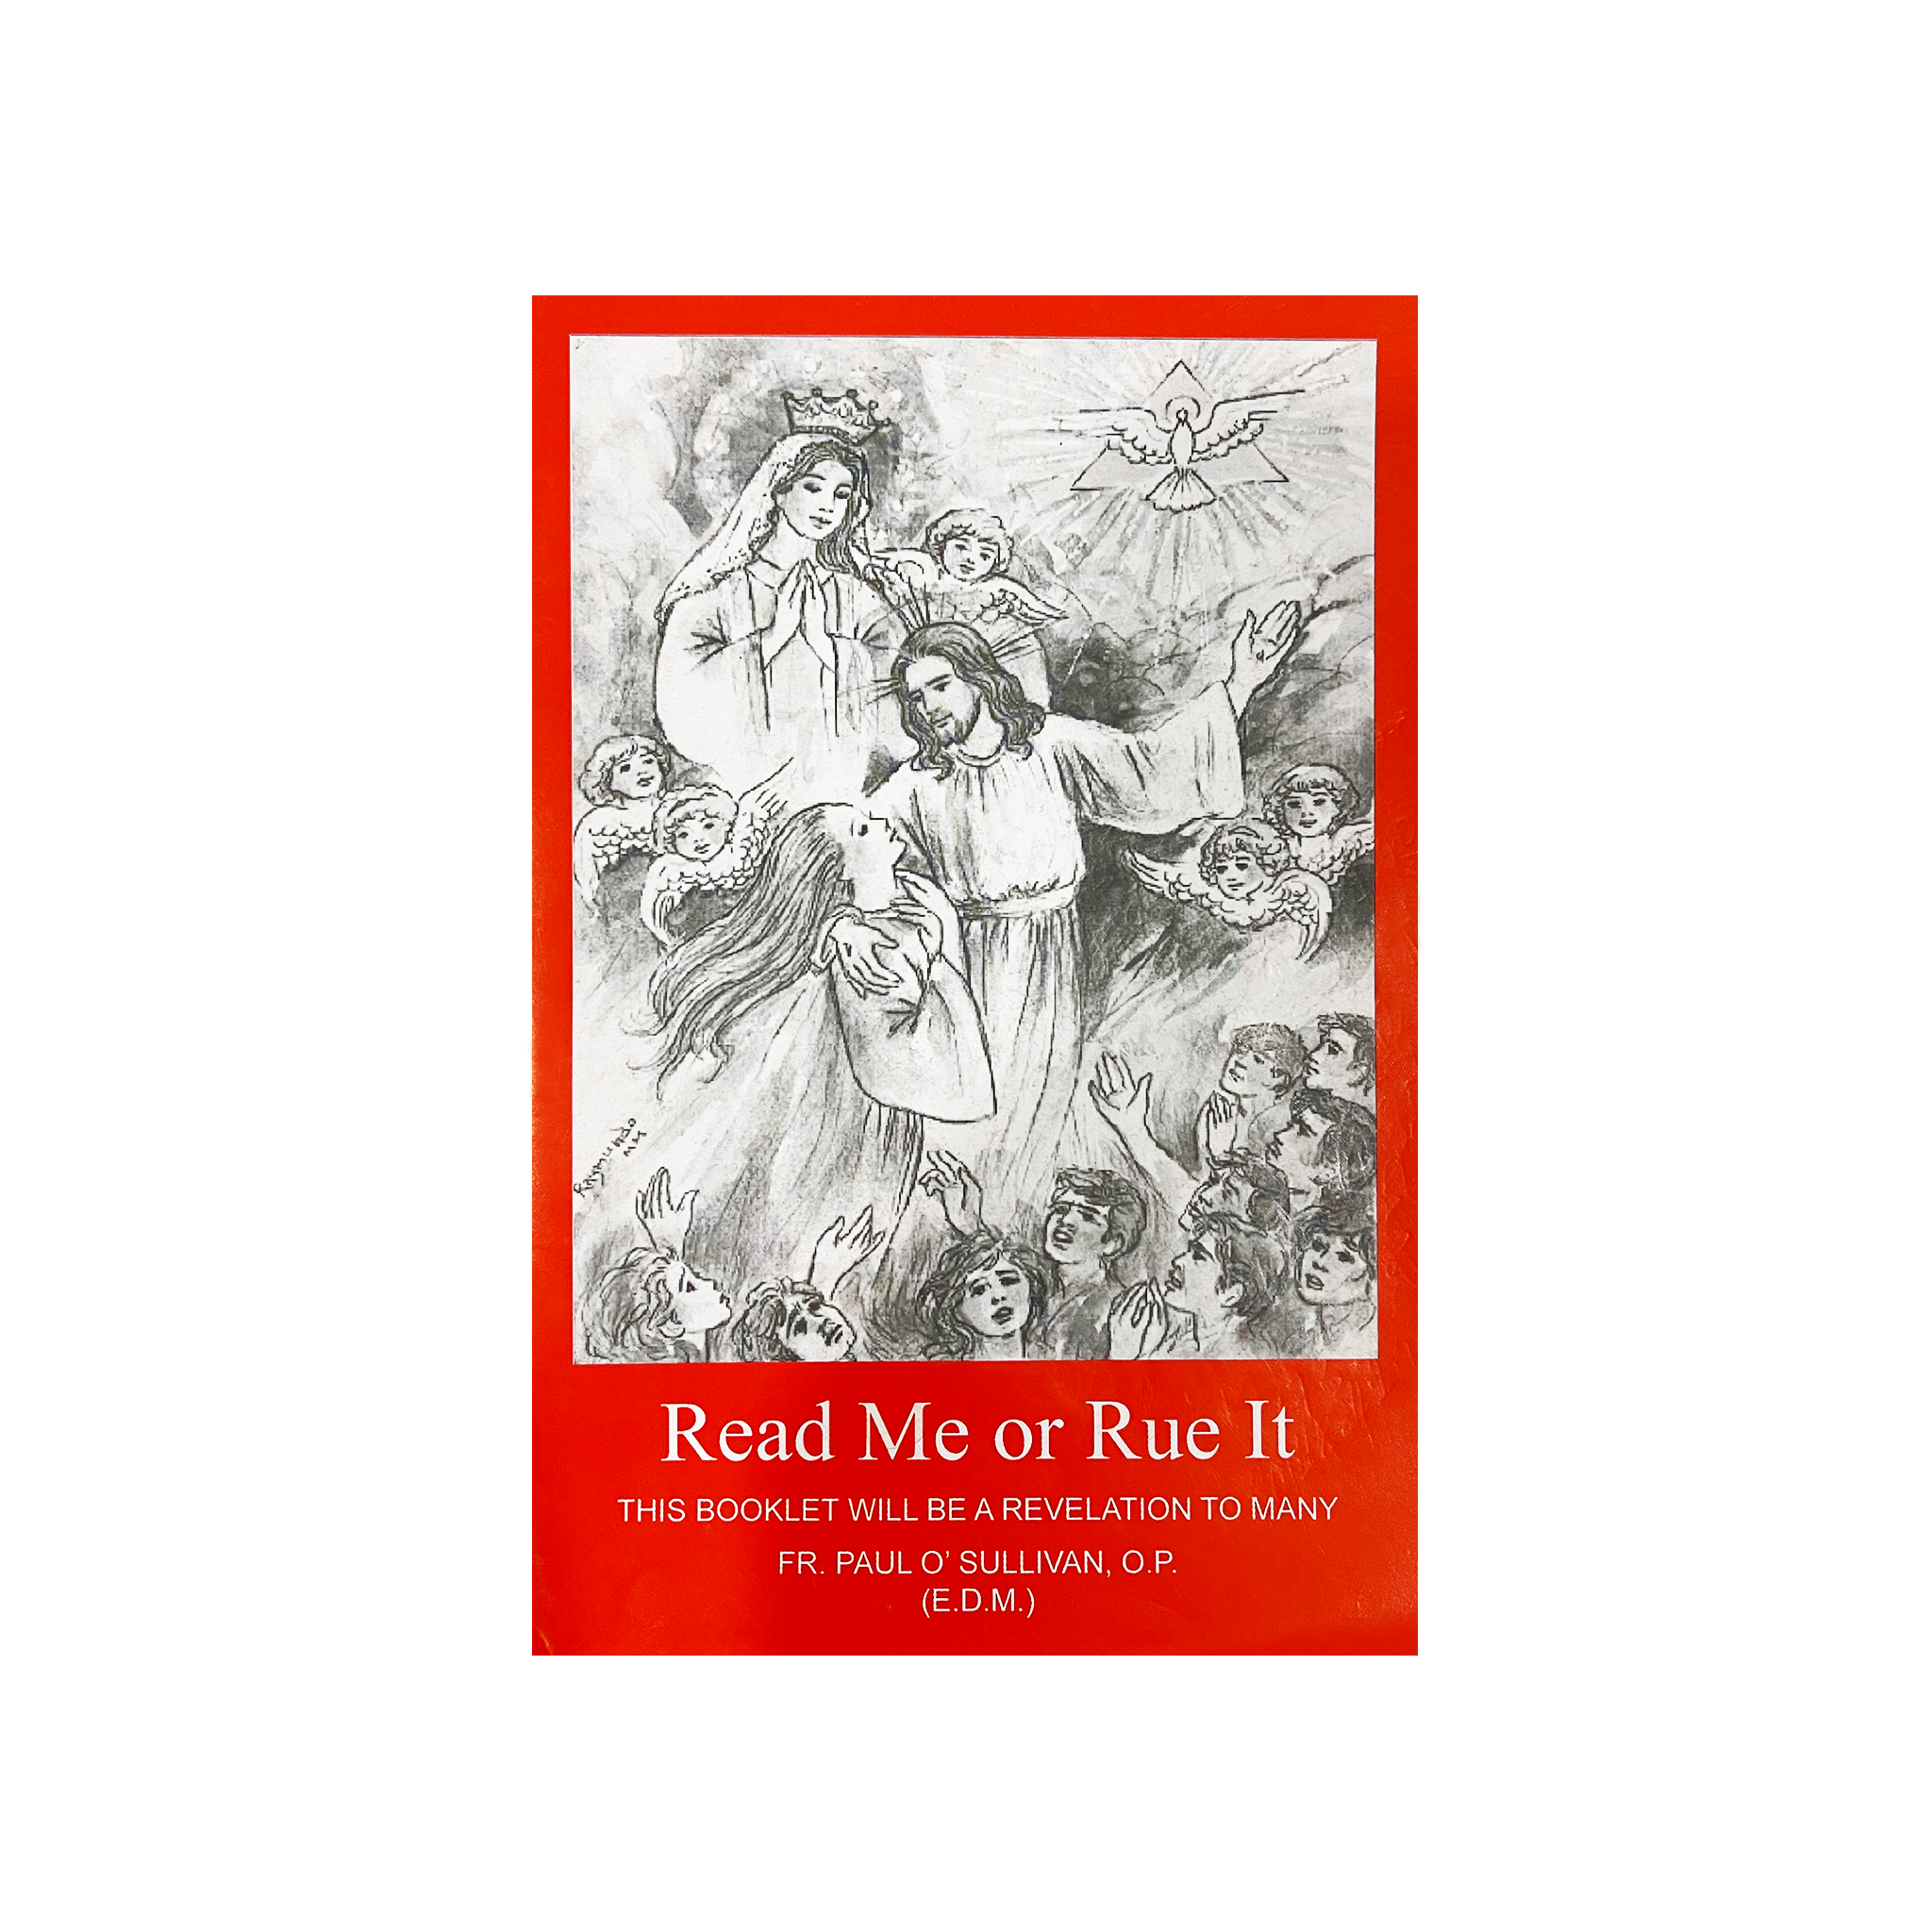 READ ME OR RUE IT BOOKLET